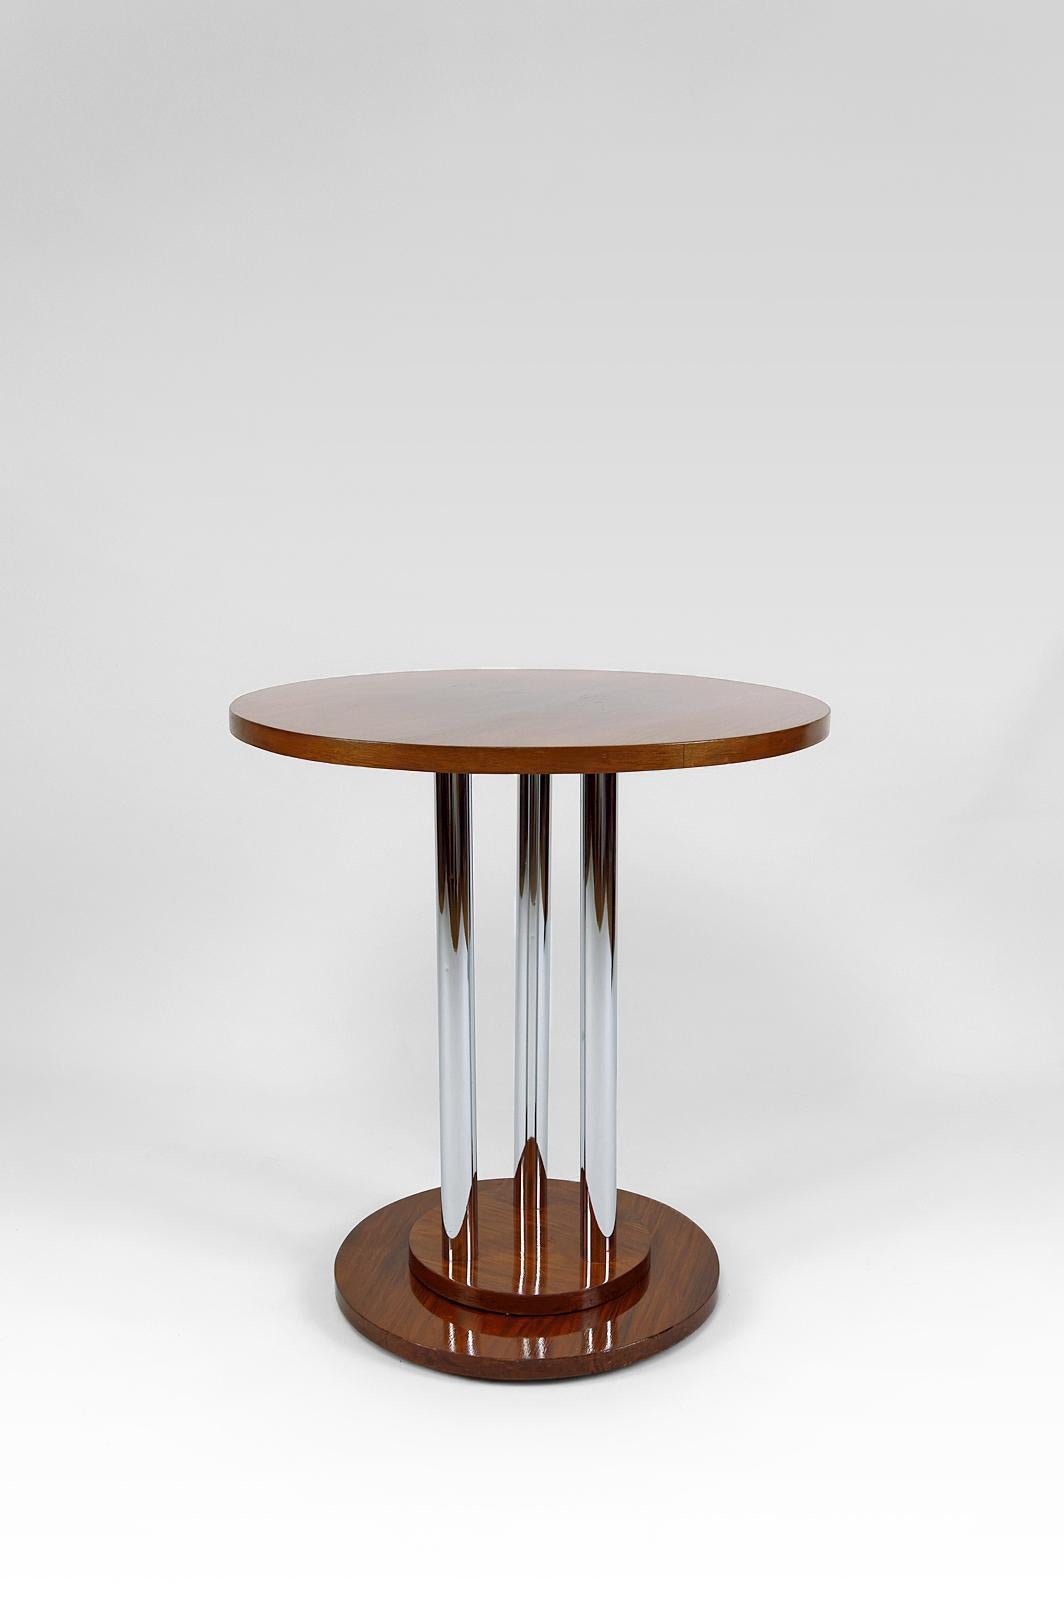 Modernist Art Deco pedestal table in walnut and chrome, France, Circa 1930

Circular pedestal table, walnut veneer and chrome tubes.

Modernist Art Deco, France, Circa 1930

In very good condition.

Dimensions:
height 60 cm
tray diameter 55 cm
base